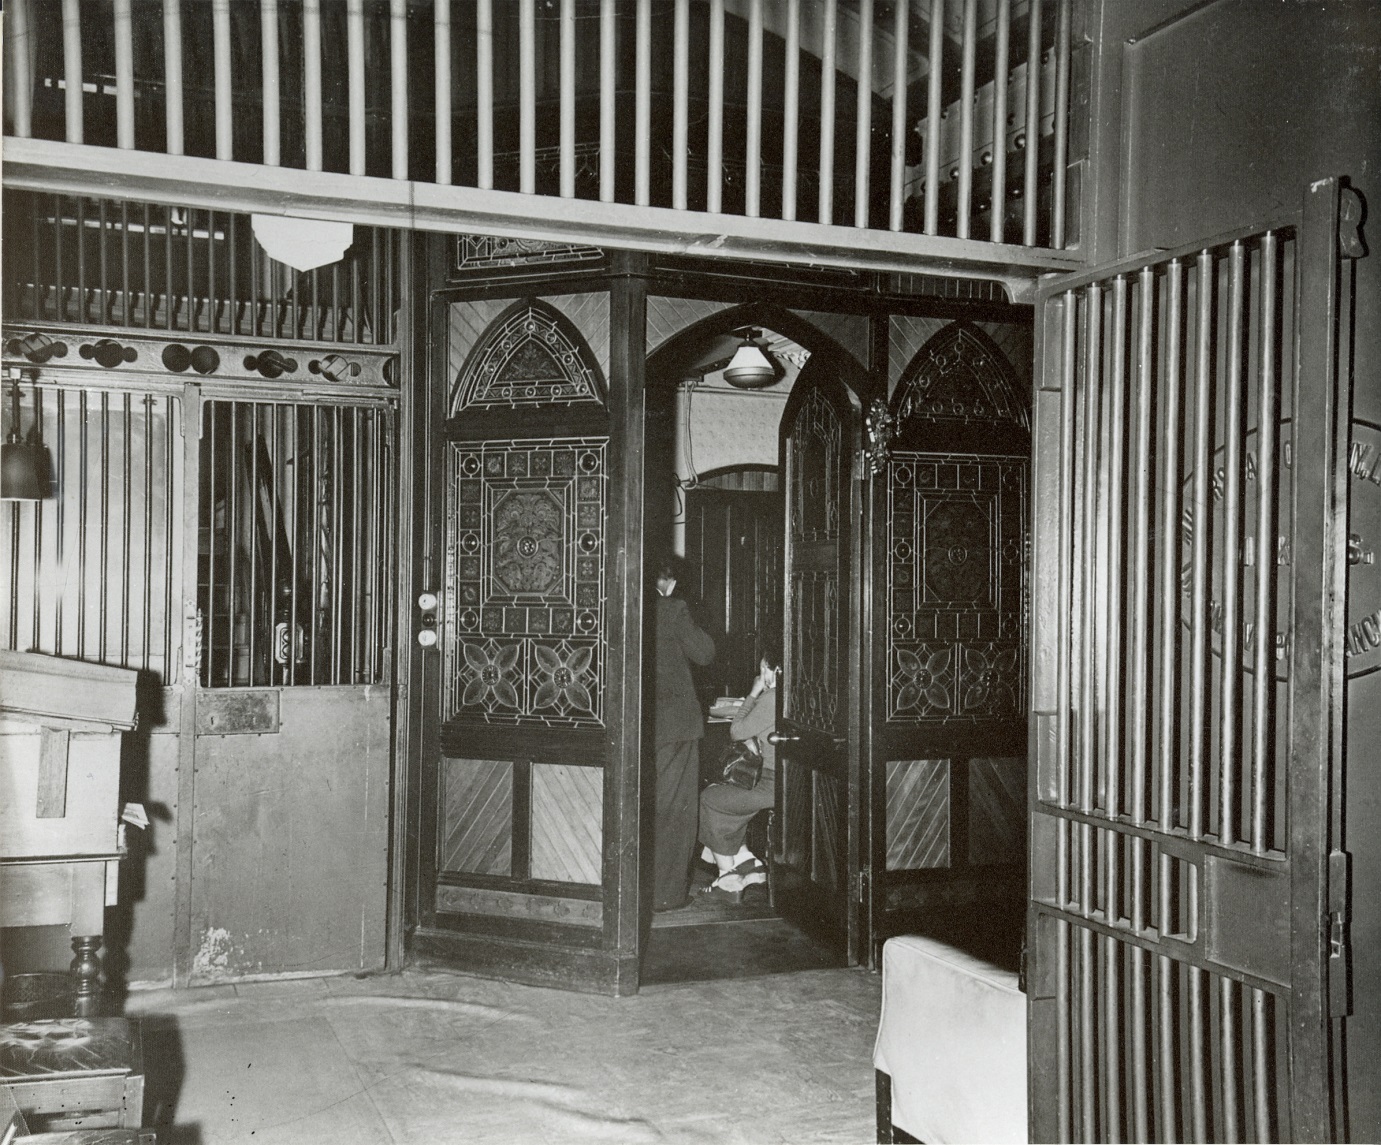 Customers using ANZ’s Safety Deposit Facility at 90 Queen Street in the 1930s. The Gothic architecture  gives the building an atmospheric feeling and lends to the legends of a ghost haunting the vaults. 

You can find out more about the ghost and the vaults in the article below. 
